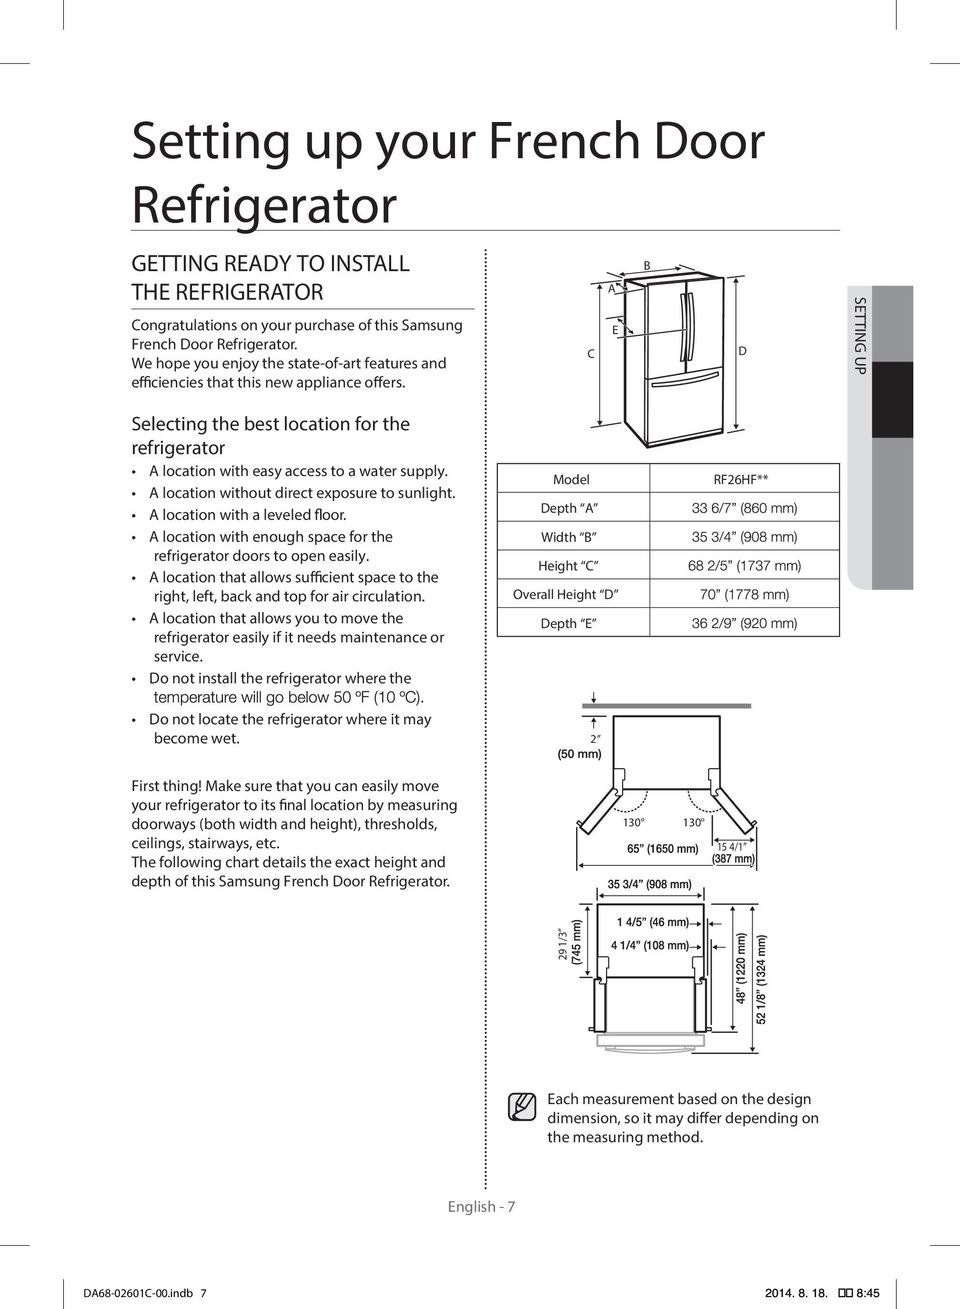 C A E B D SETTING UP Selecting the best location for the refrigerator A location with easy access to a water supply. A location without direct exposure to sunlight. A location with a leveled floor.